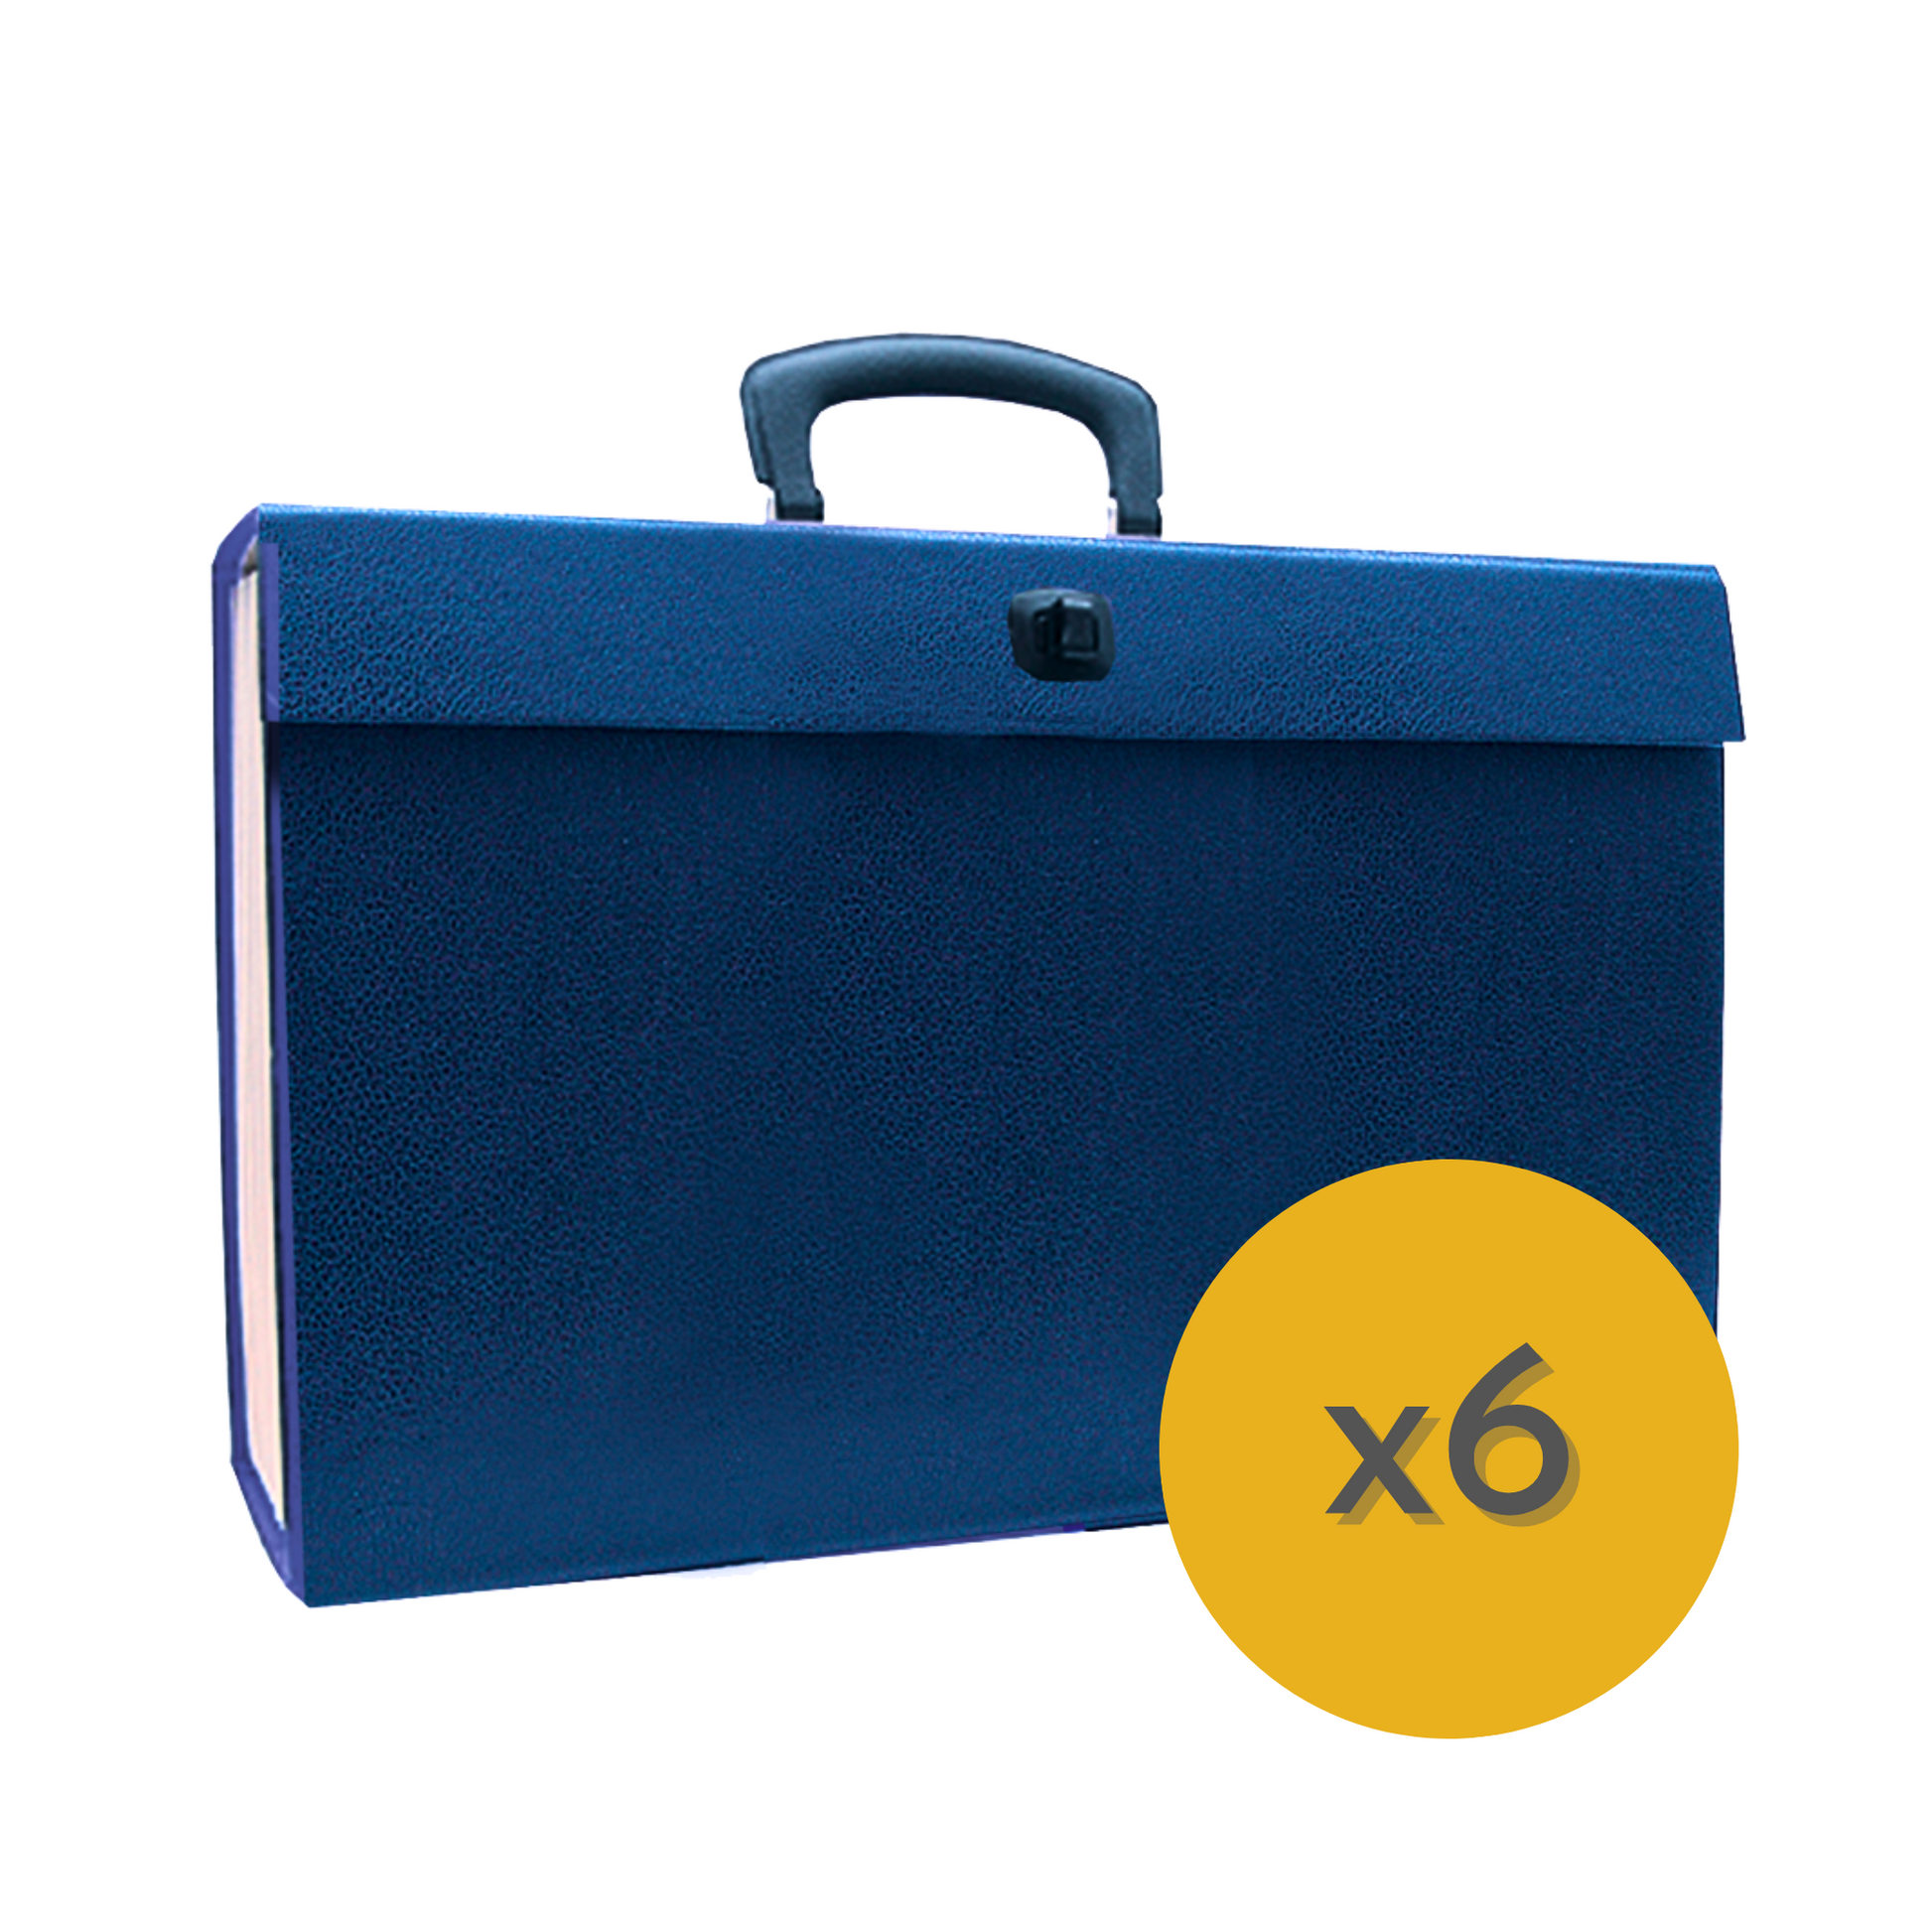 The image displays a blue, textured expanding file case with a handle and a clasp for secure closure. It's a portable filing solution typically used for organizing and transporting documents. A yellow circle with the inscription "x6" shows that this product is available as part of a pack of six, indicating a bulk purchase or a package deal. The design suggests practicality and convenience for users needing to carry and access their files on the go.